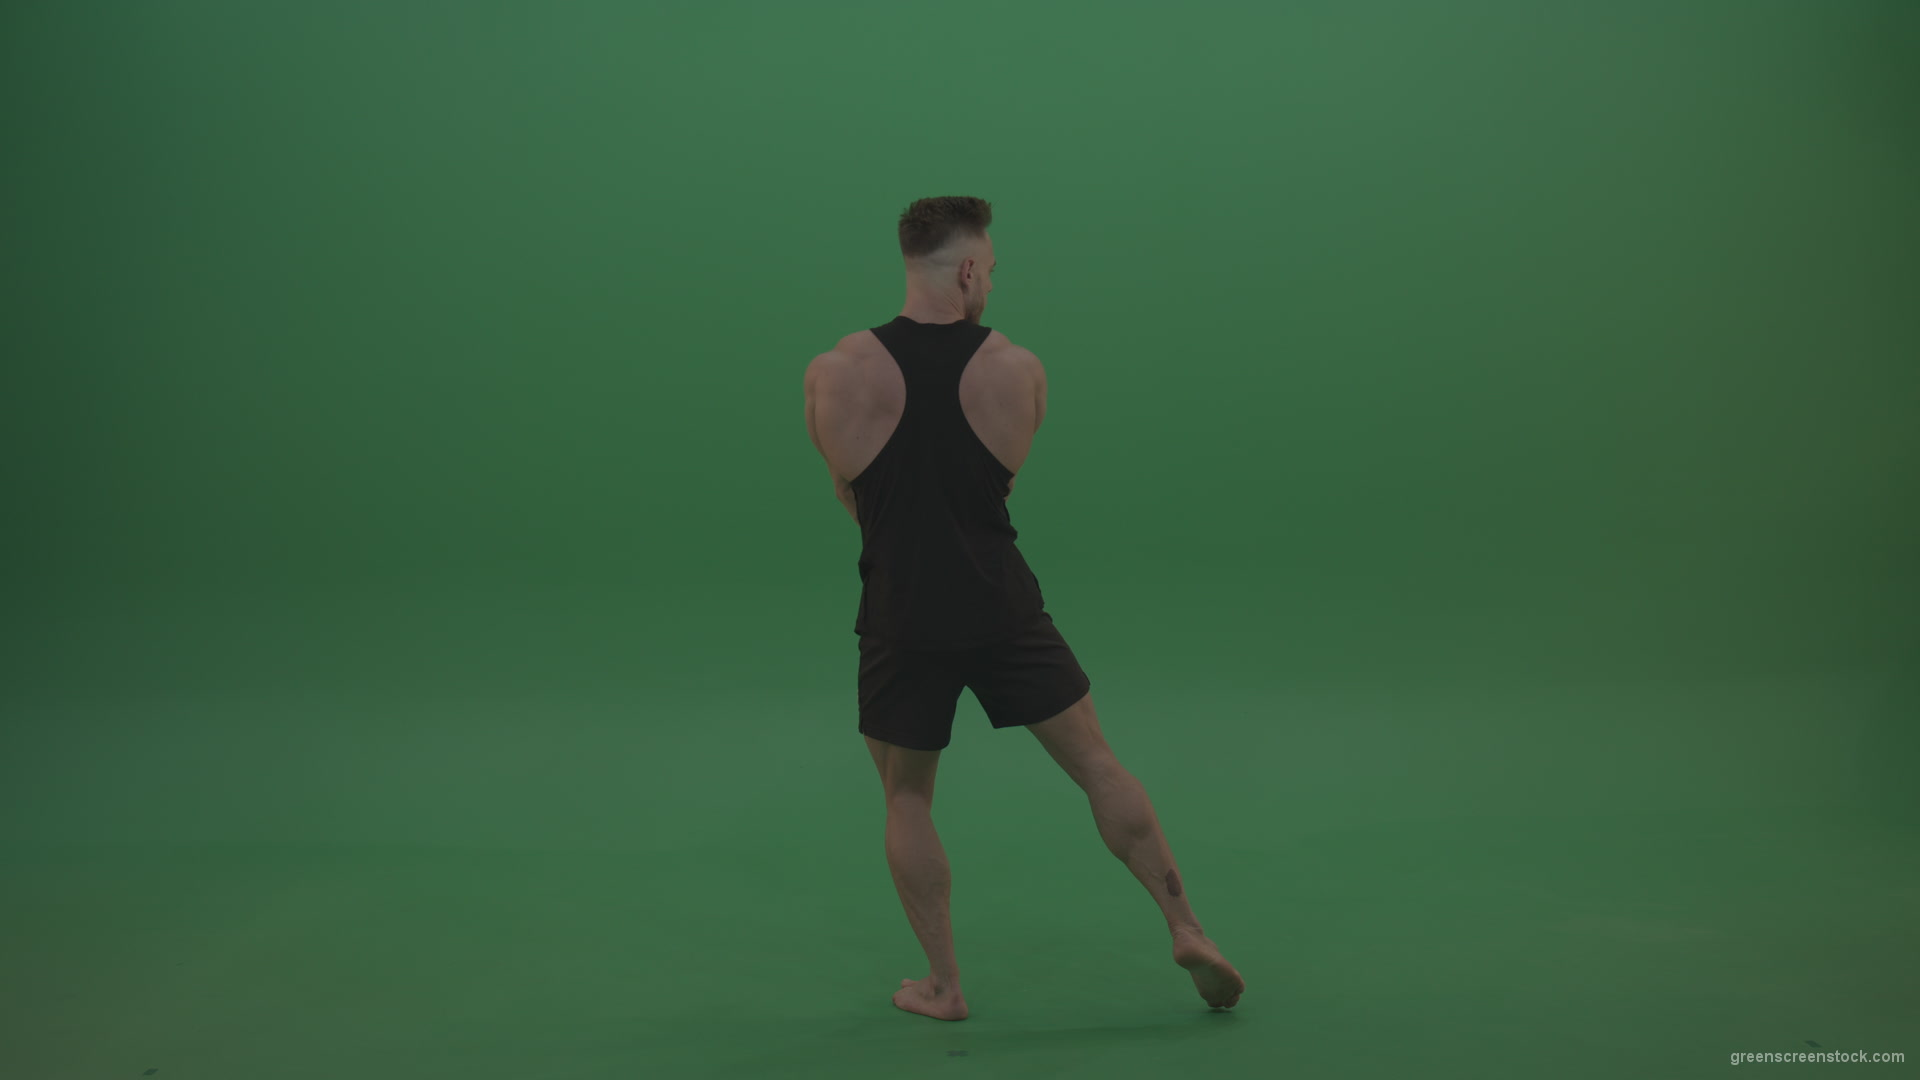 Young_Workout_Bodybuilder_Showing_Great_Double_Rear_Biceps_Technique_Green_Screen_Wall_Background_006 Green Screen Stock